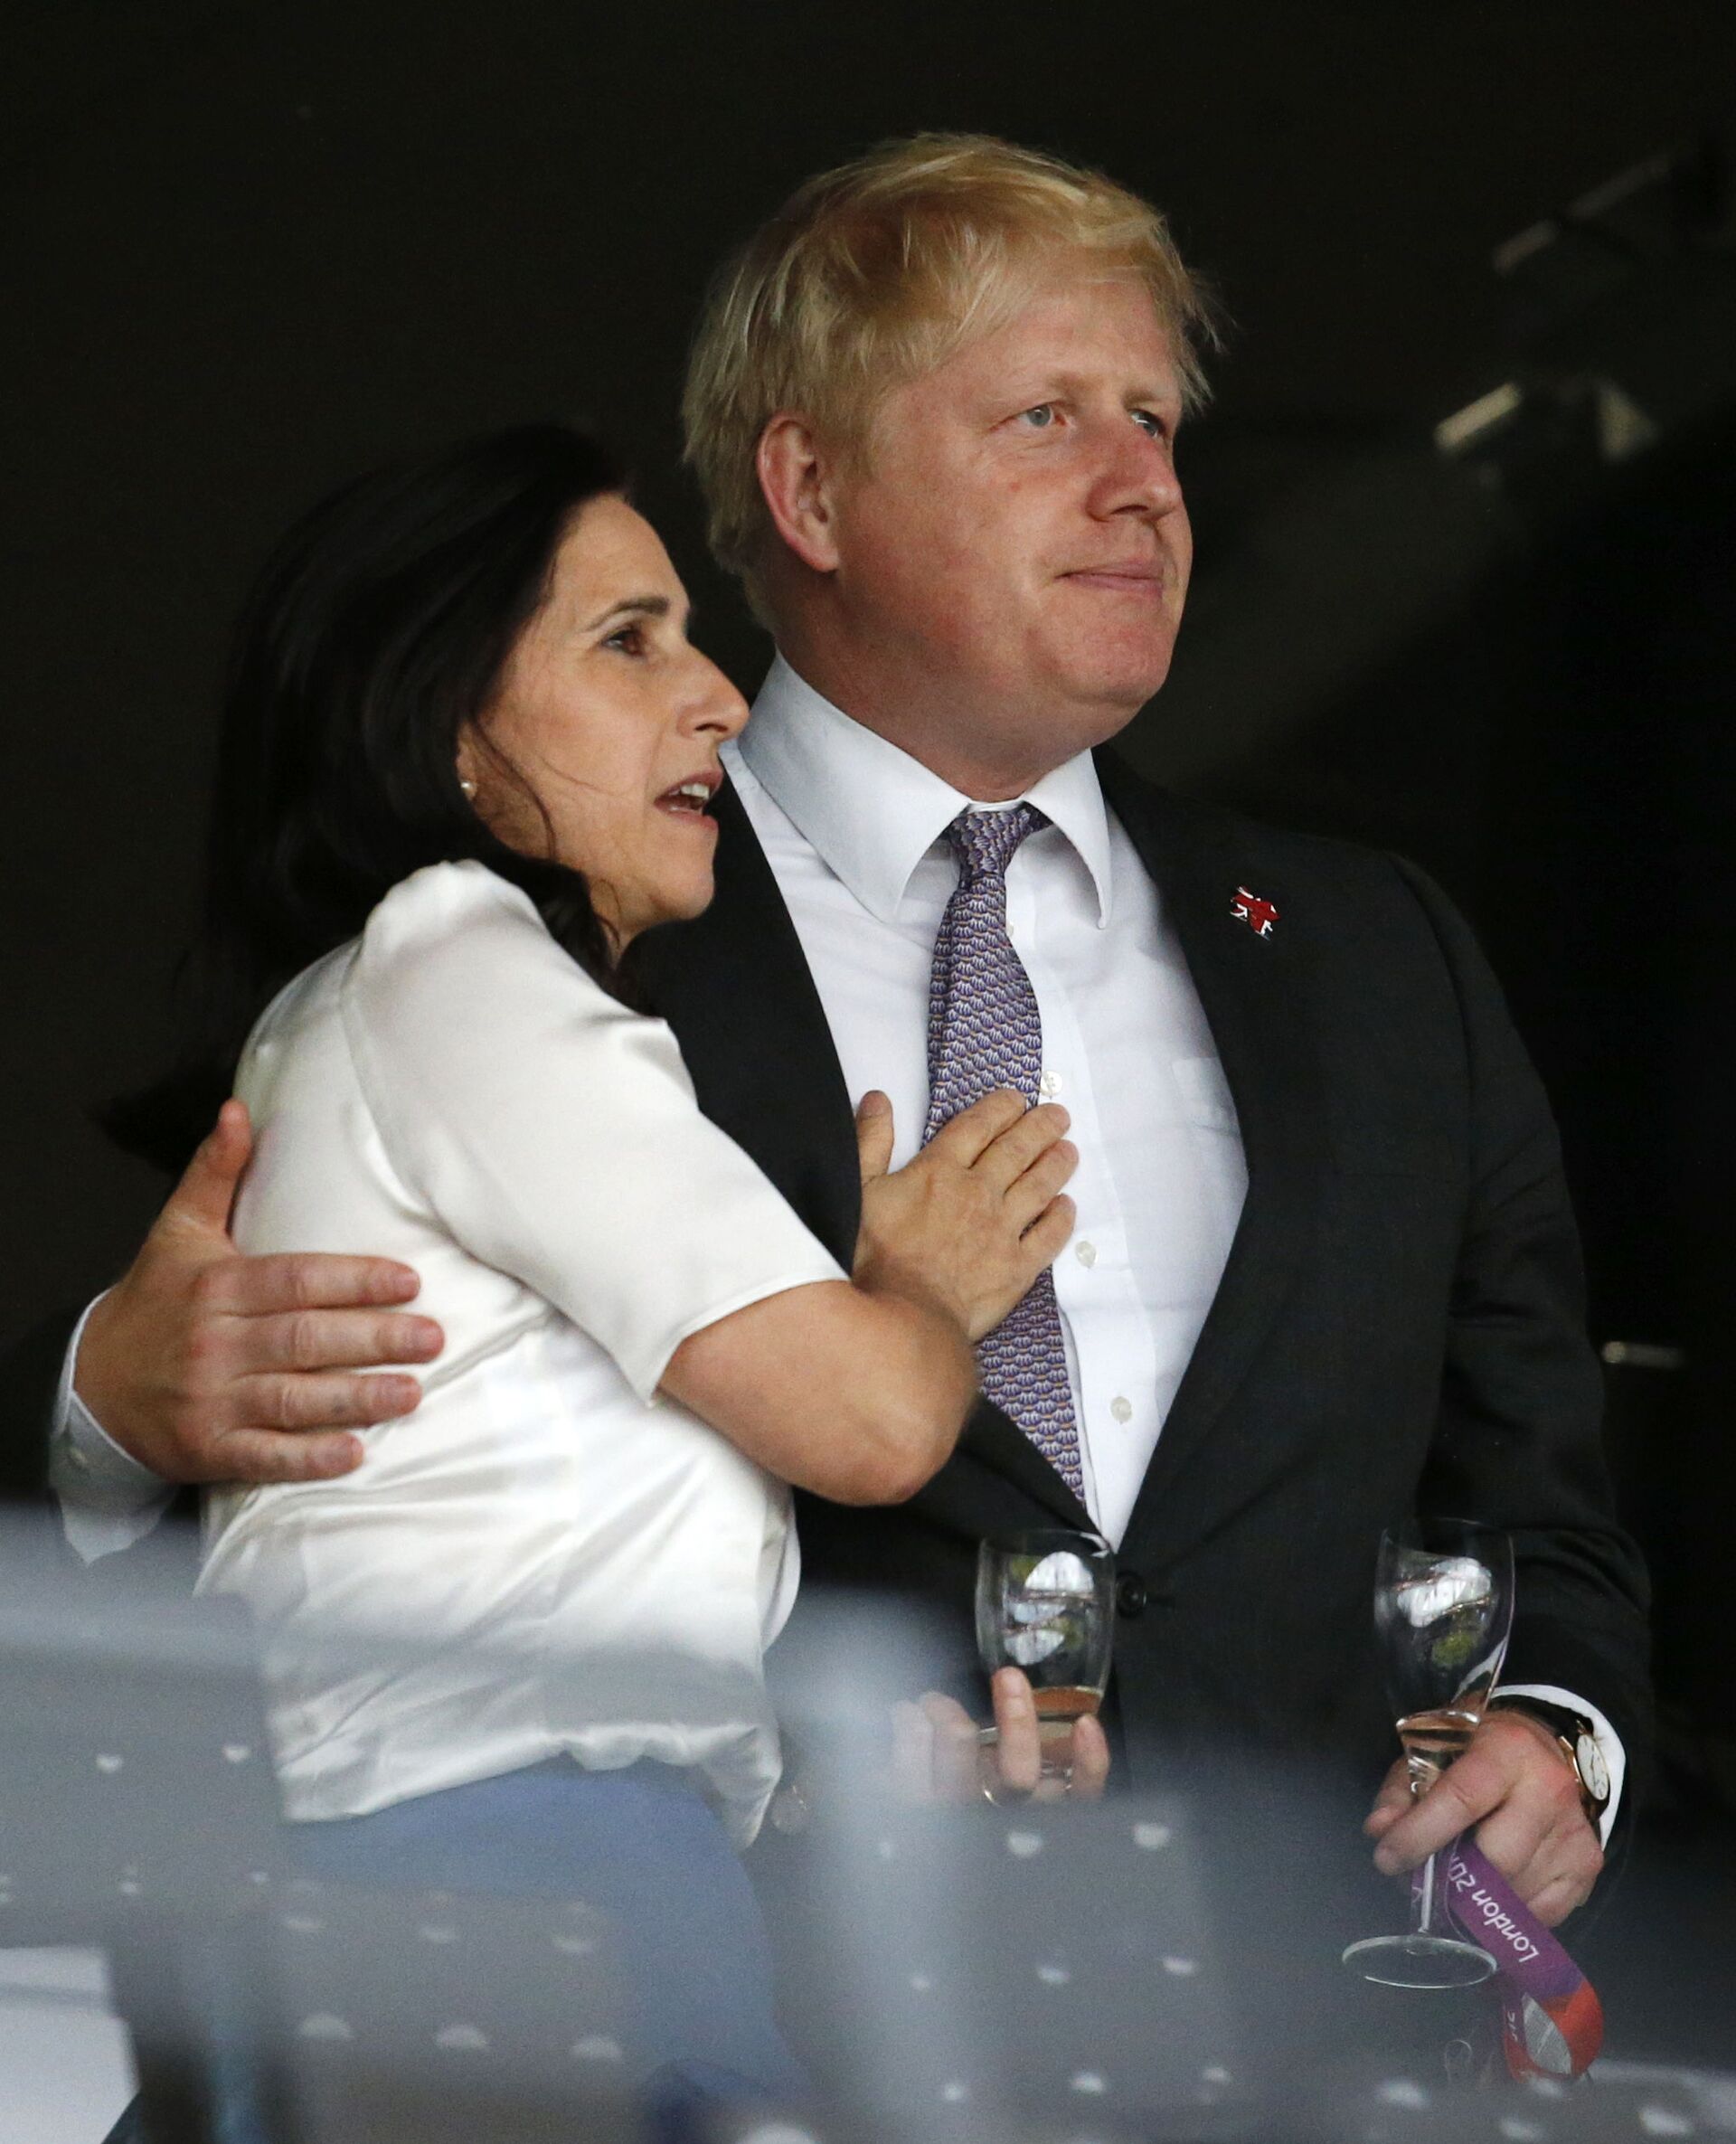 Old Flames: Boris Johnson's Turbulent Love Life as He Ties the Knot for the Third Time - Sputnik International, 1920, 30.05.2021